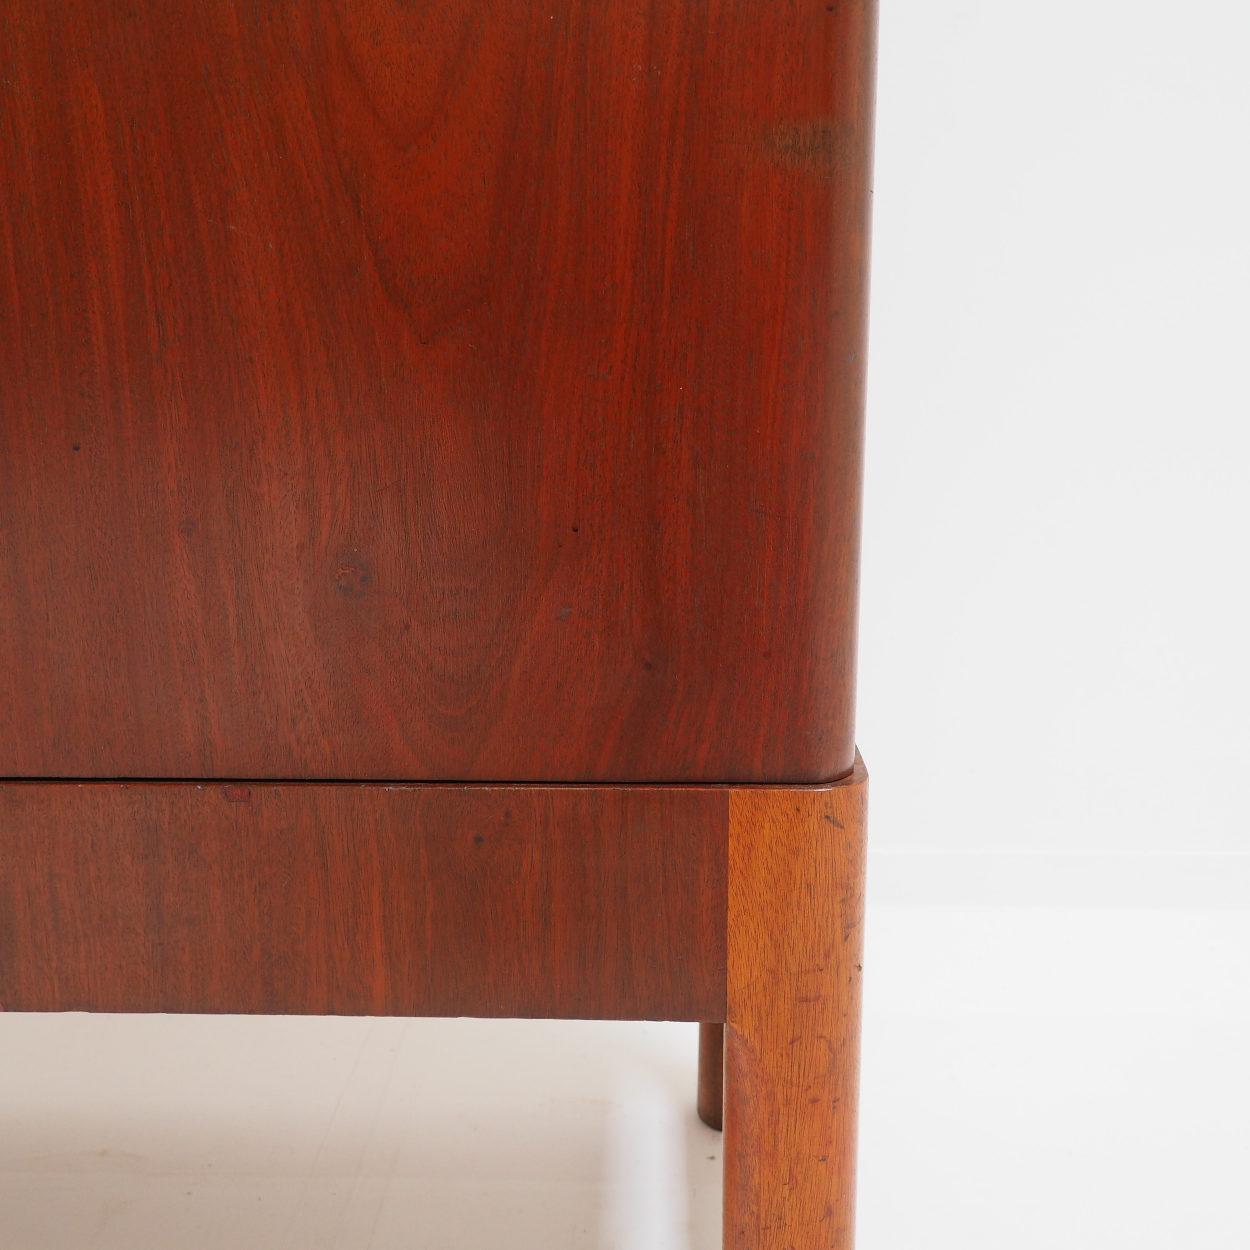 Oak Scandinavian High Quality Cabinet from the 1960s For Sale